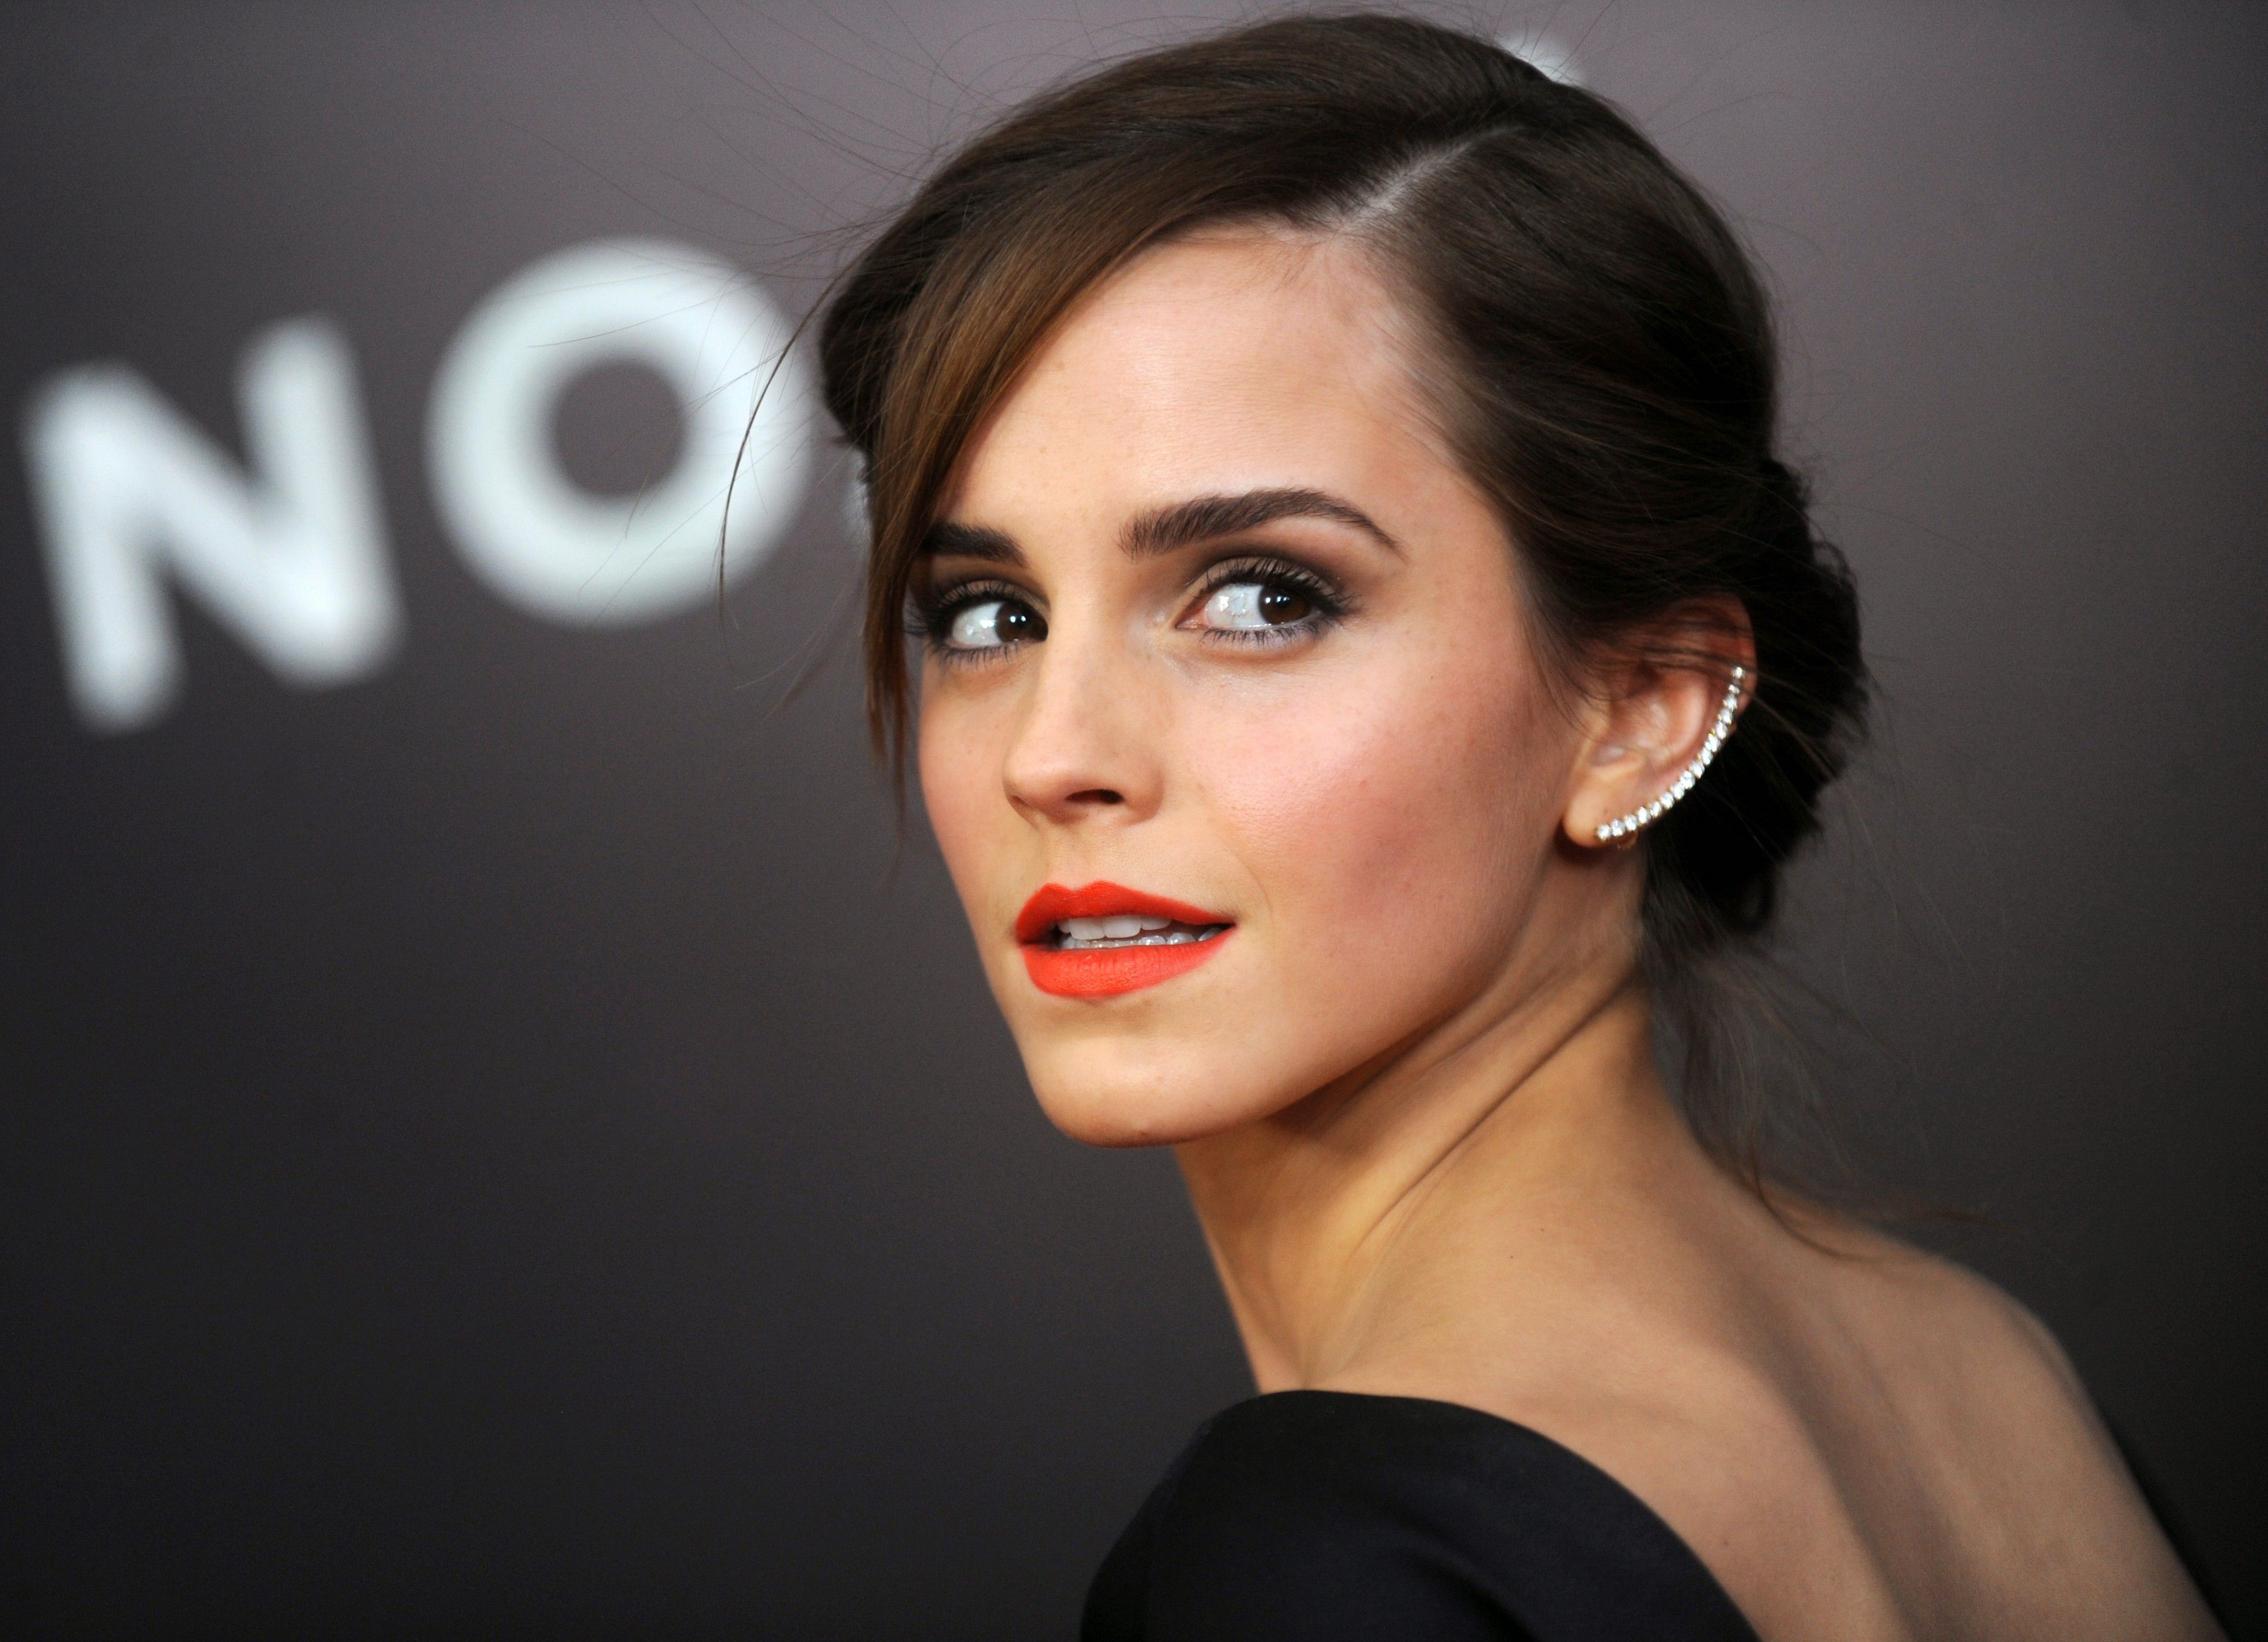 Emma Watson 2017 4k, HD Celebrities, 4k Wallpaper, Image, Background, Photo and Picture